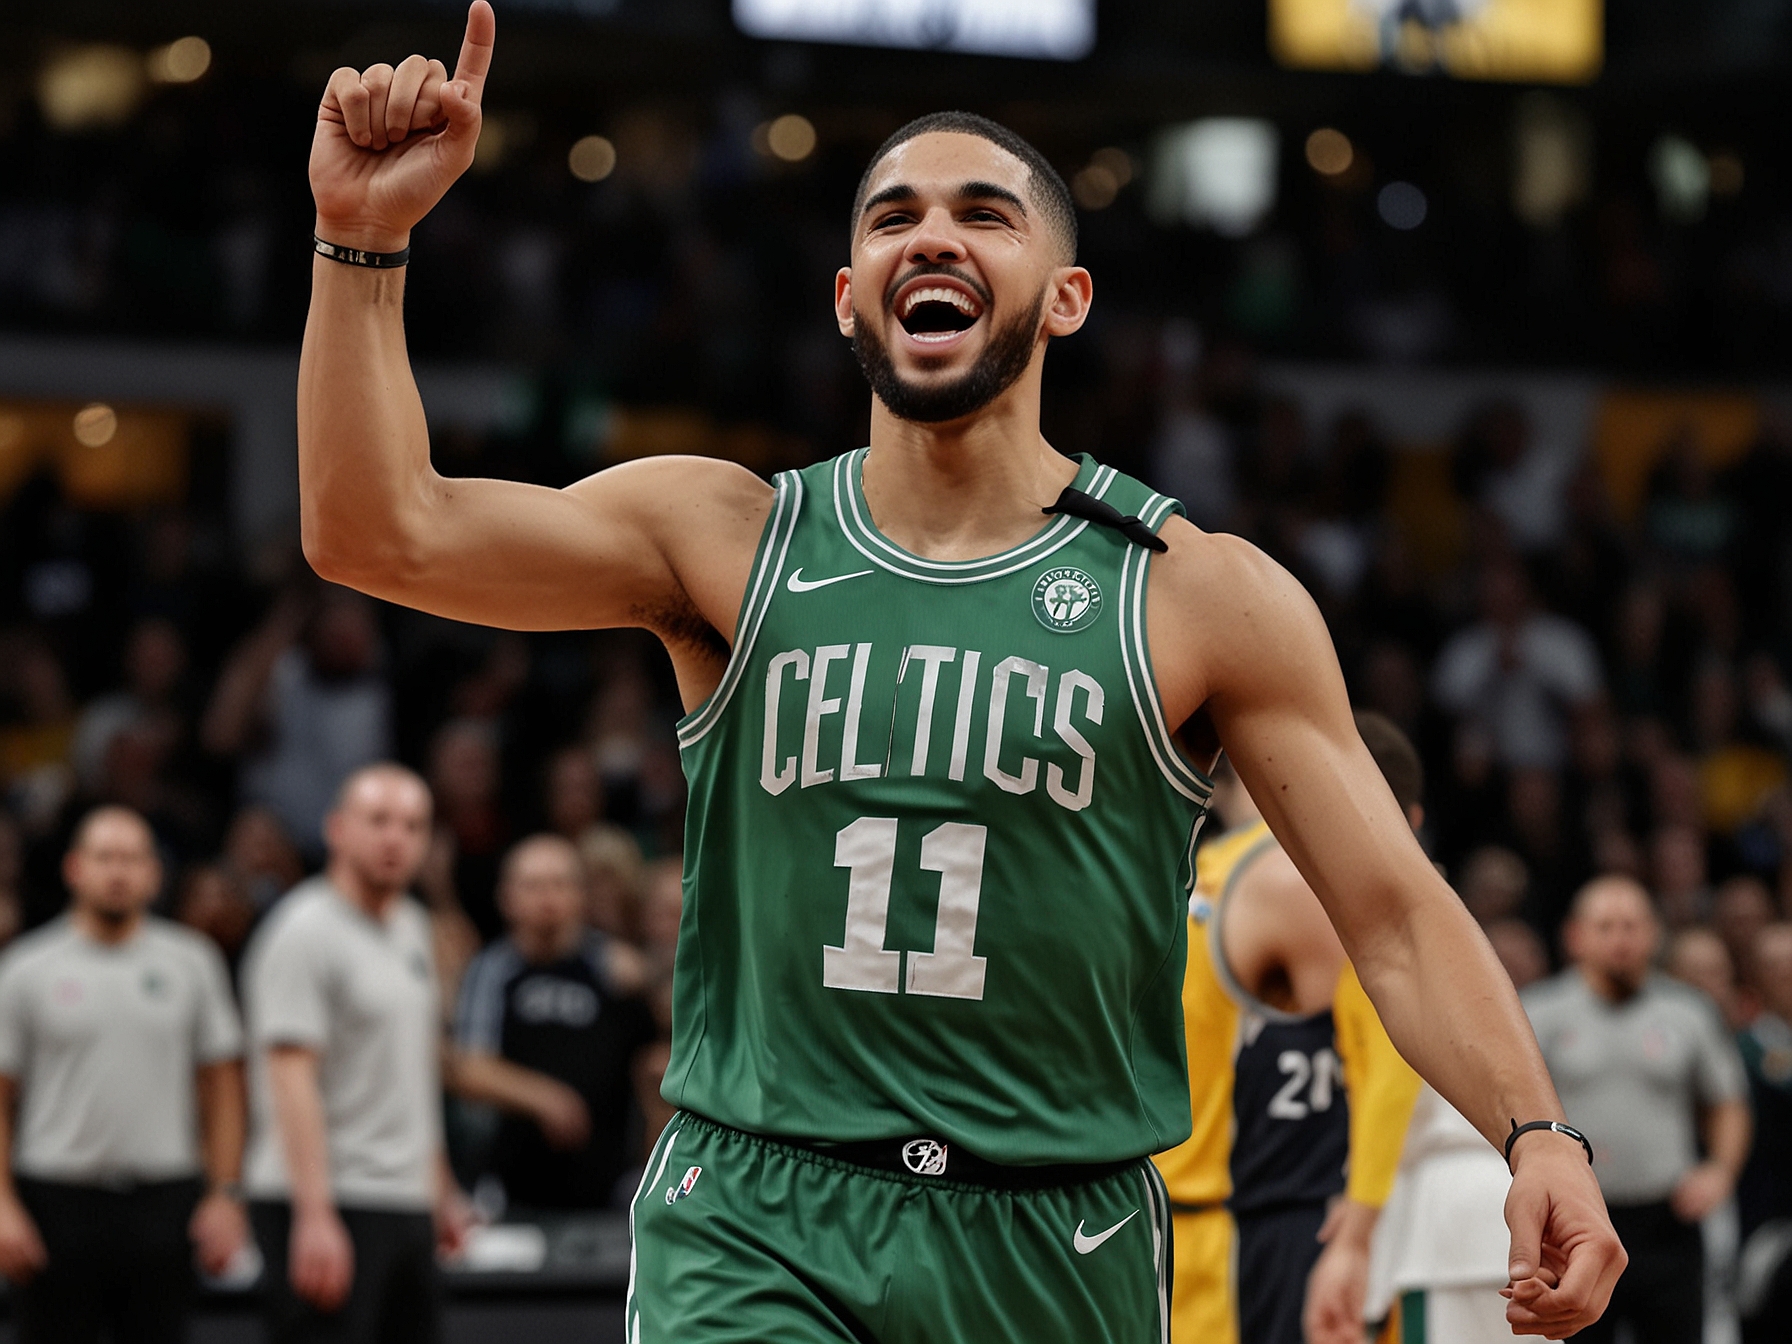 Jayson Tatum of the Boston Celtics celebrates after scoring during the decisive game five of the NBA Finals at the TD Garden. His 34 points helped secure Boston's record-breaking 18th championship.